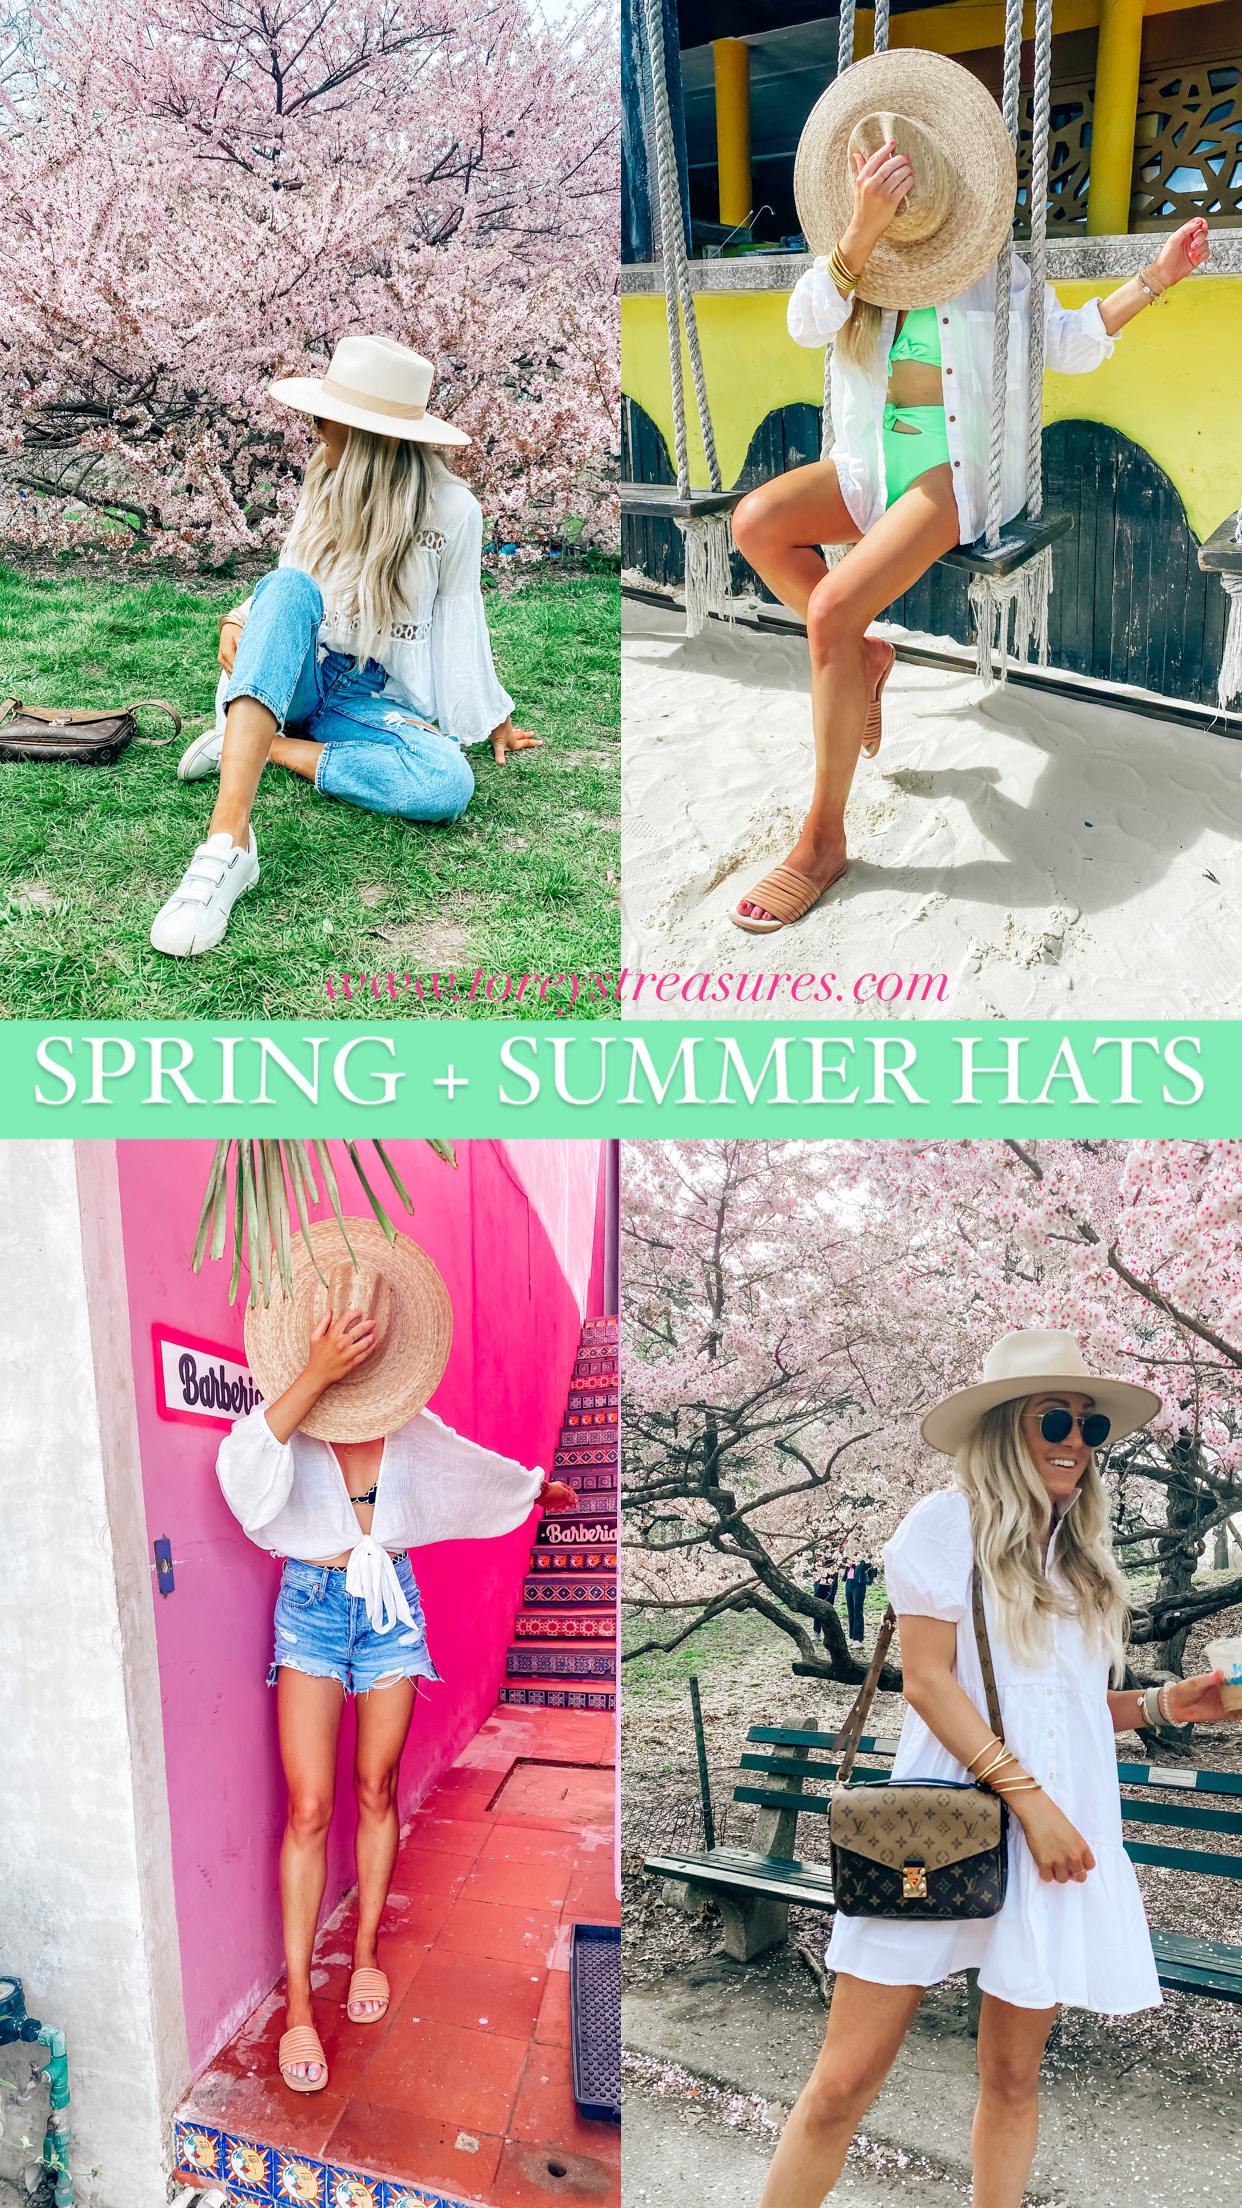 SPRING + SUMMER HATS WORTH EVERY PENNY - Torey's Treasures